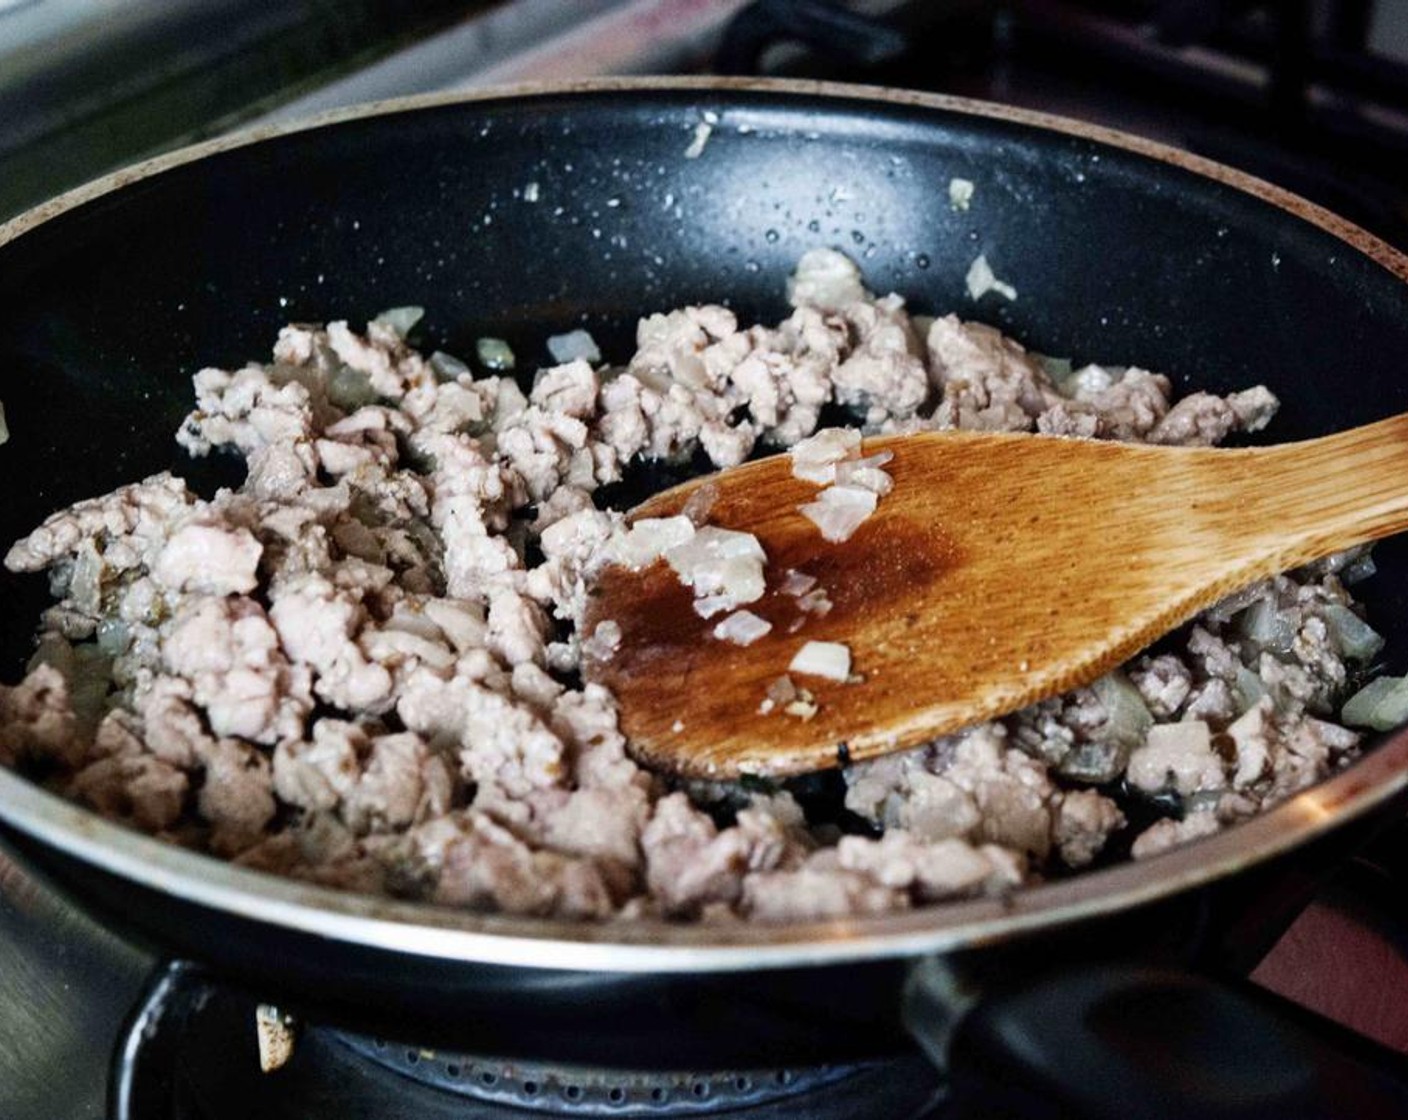 step 2 Add the 95/5 Lean Ground Pork (5.5 oz), season with Salt (to taste) and Ground Black Pepper (to taste), and cook on medium for 3 to 5 min or until meat is half cooked.